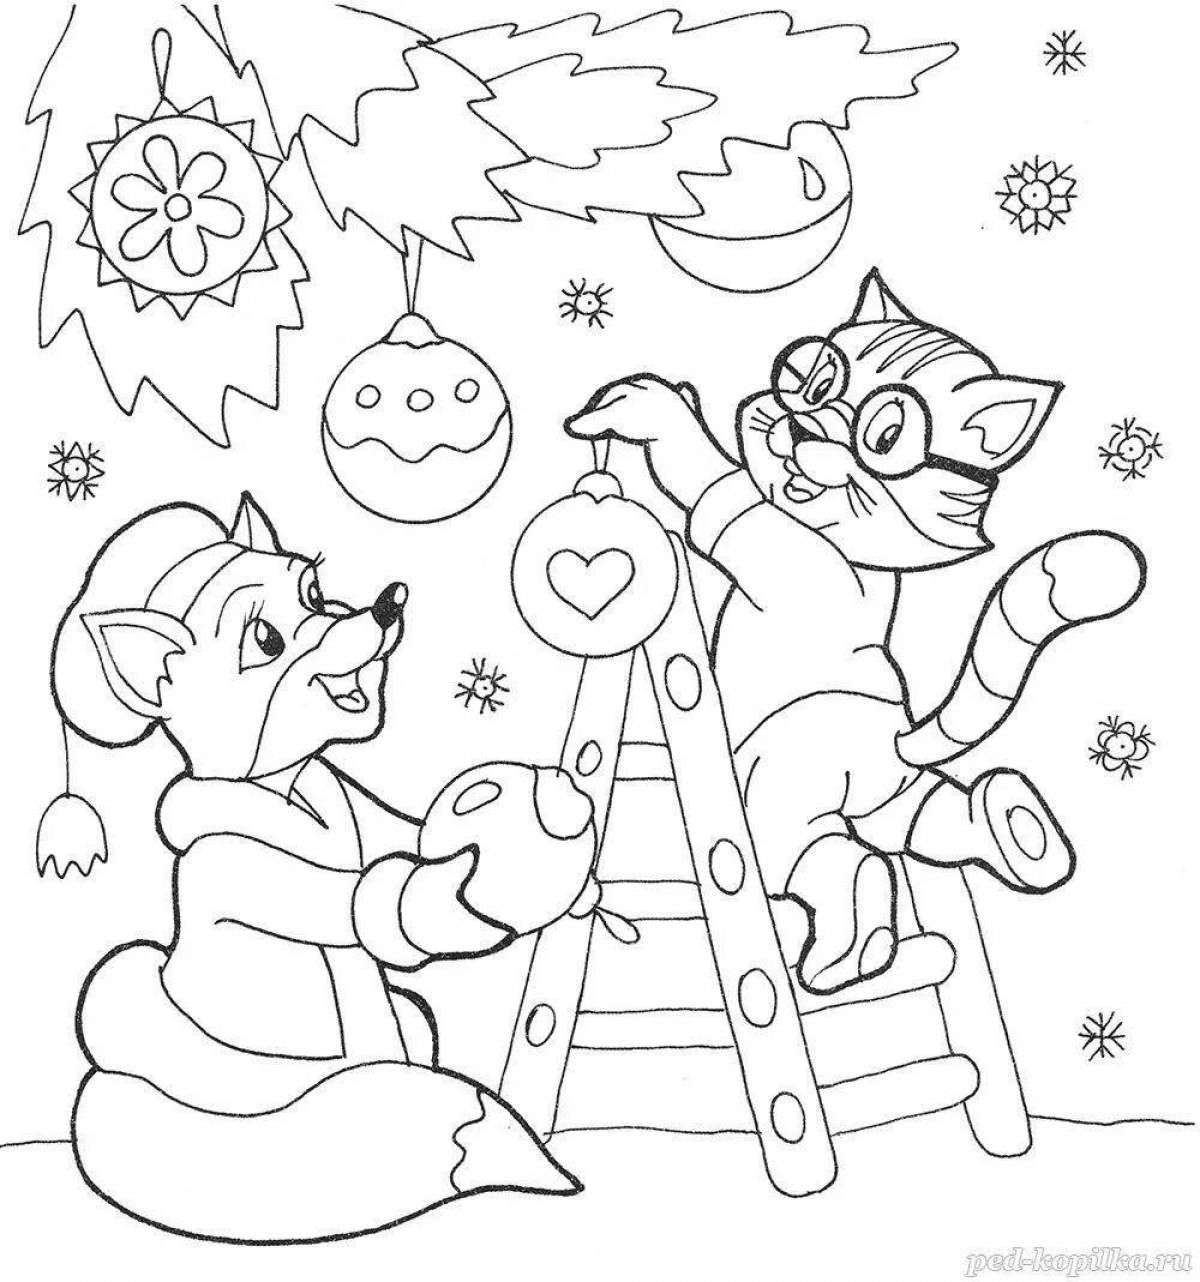 Joyful coloring winter for children 8 years old